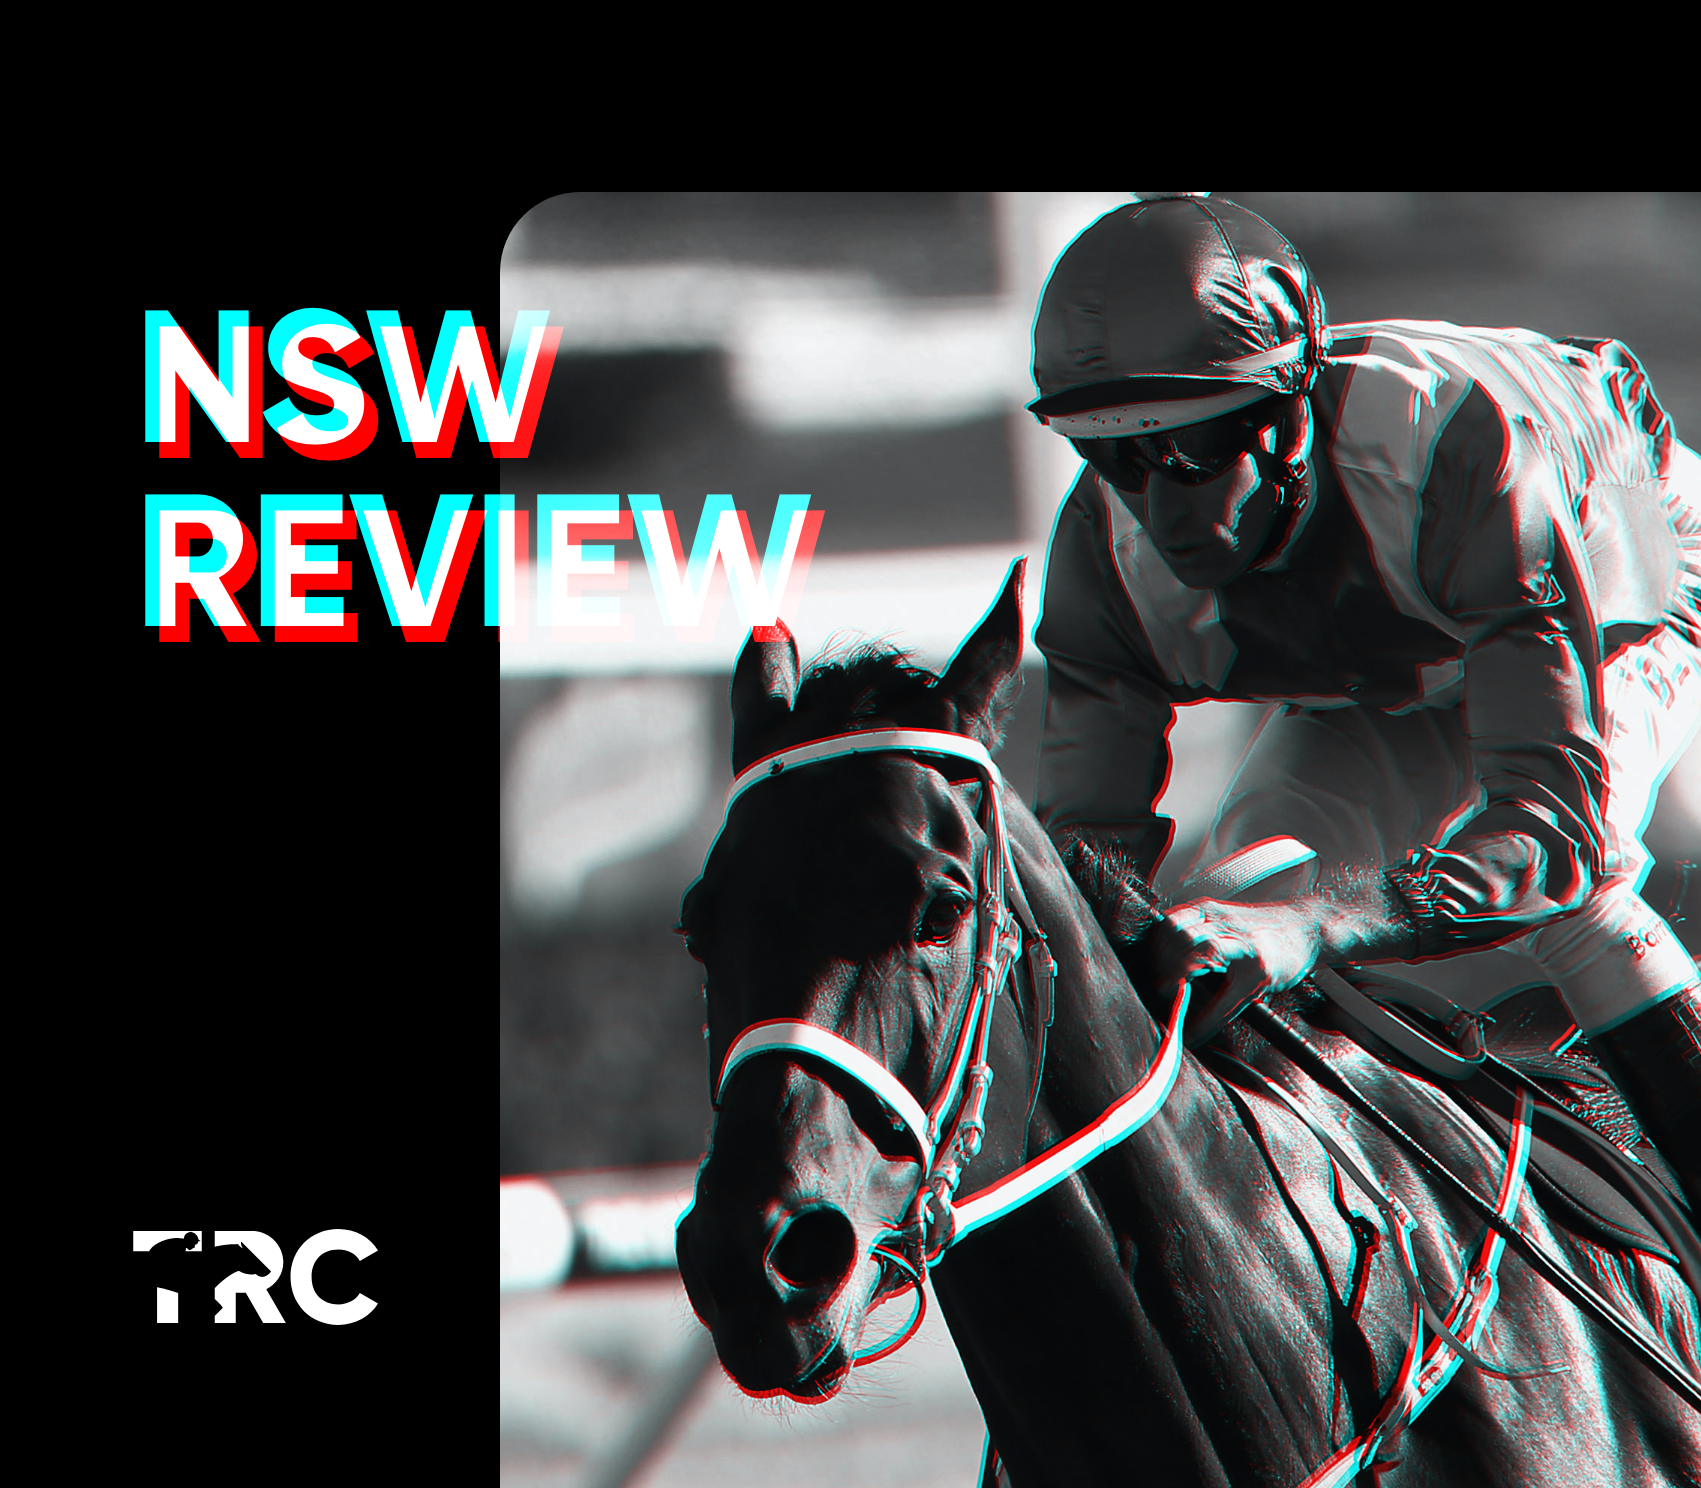 The Sydney Review | November 27th, 2021